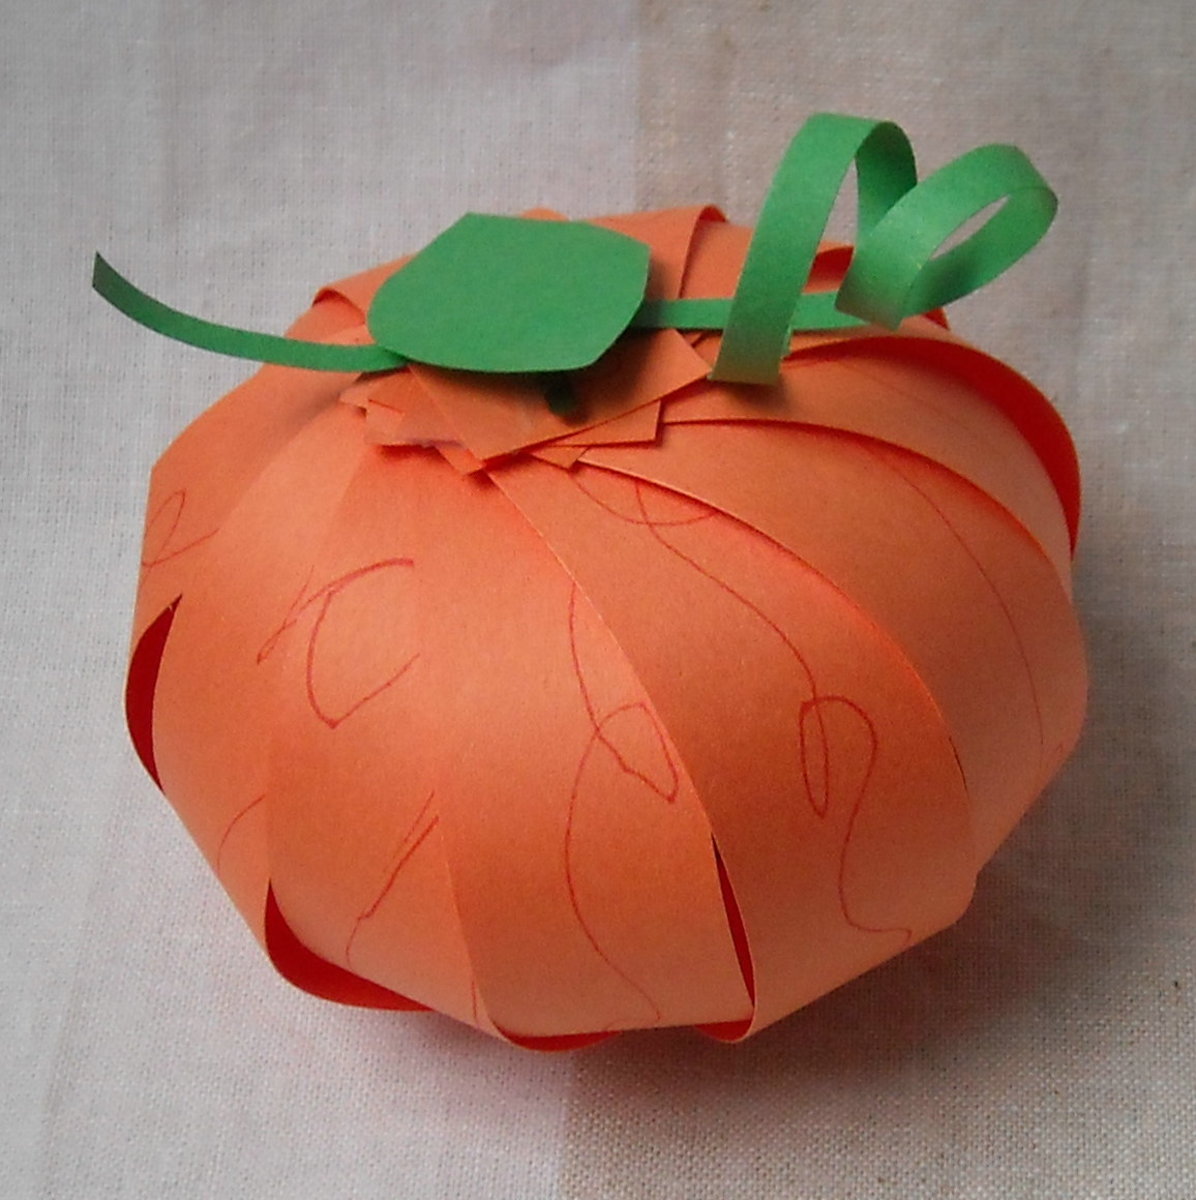 Here's our paper pumpkin.